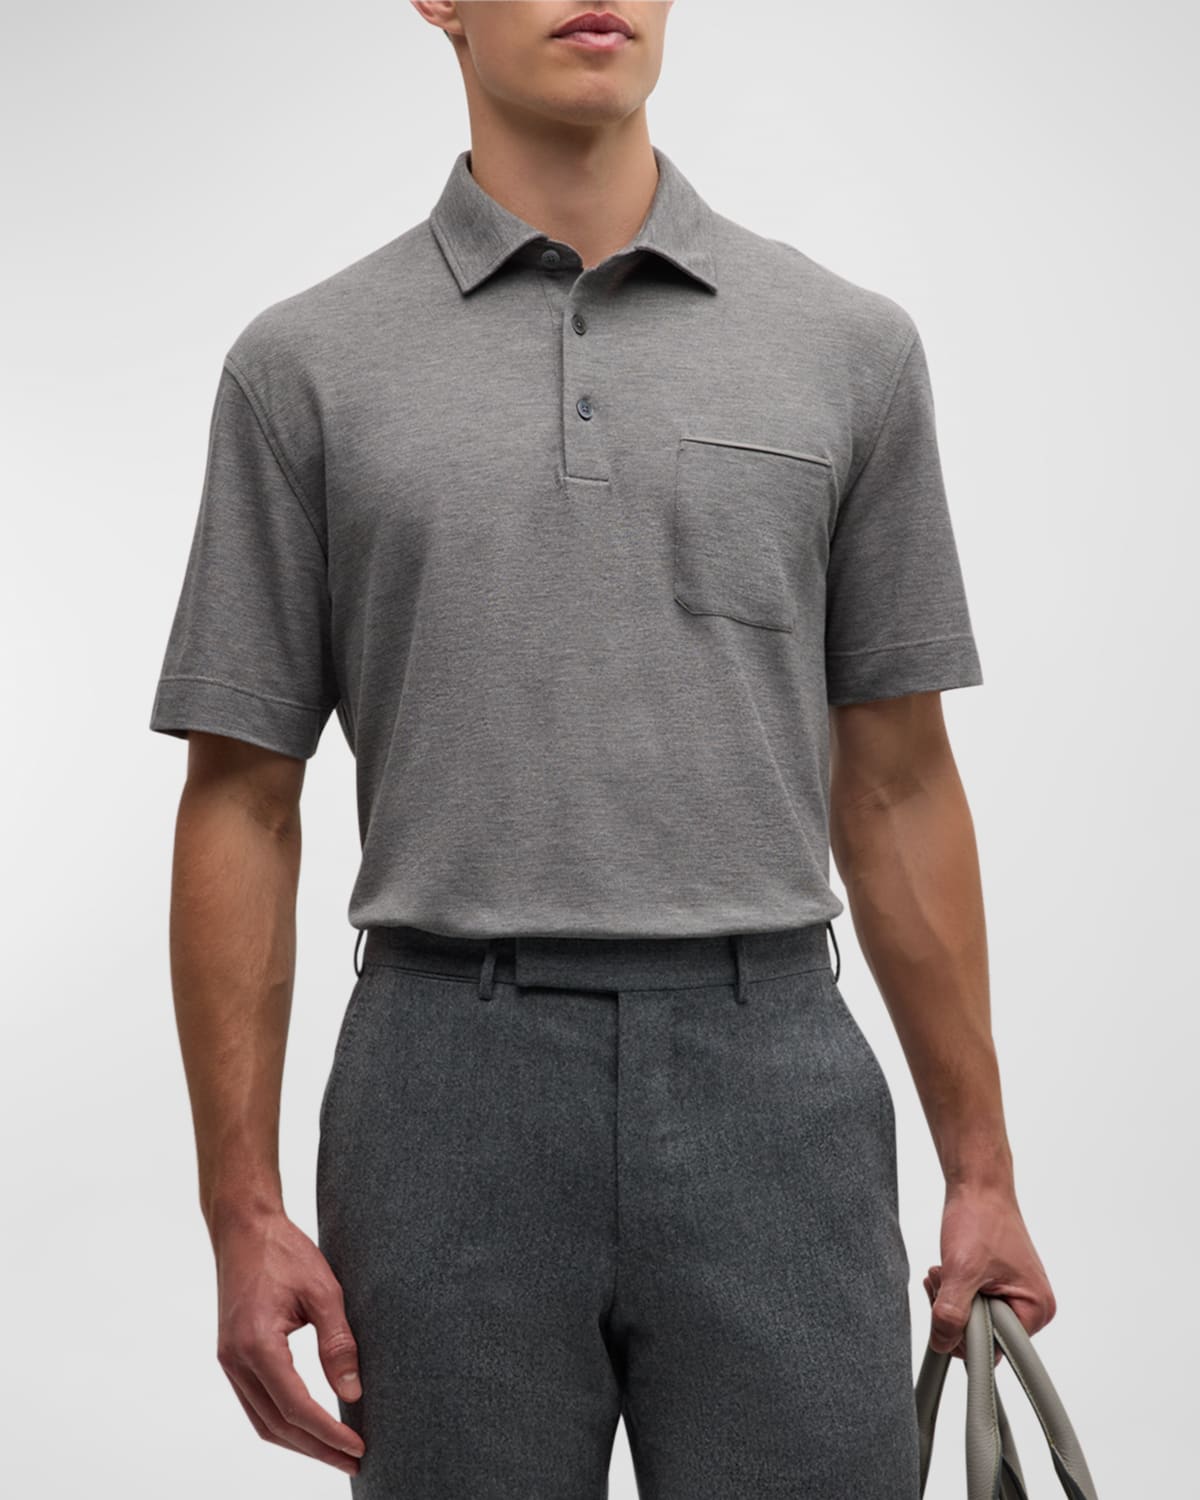 Men's Cotton Polo Shirt with Leather-Trim Pocket